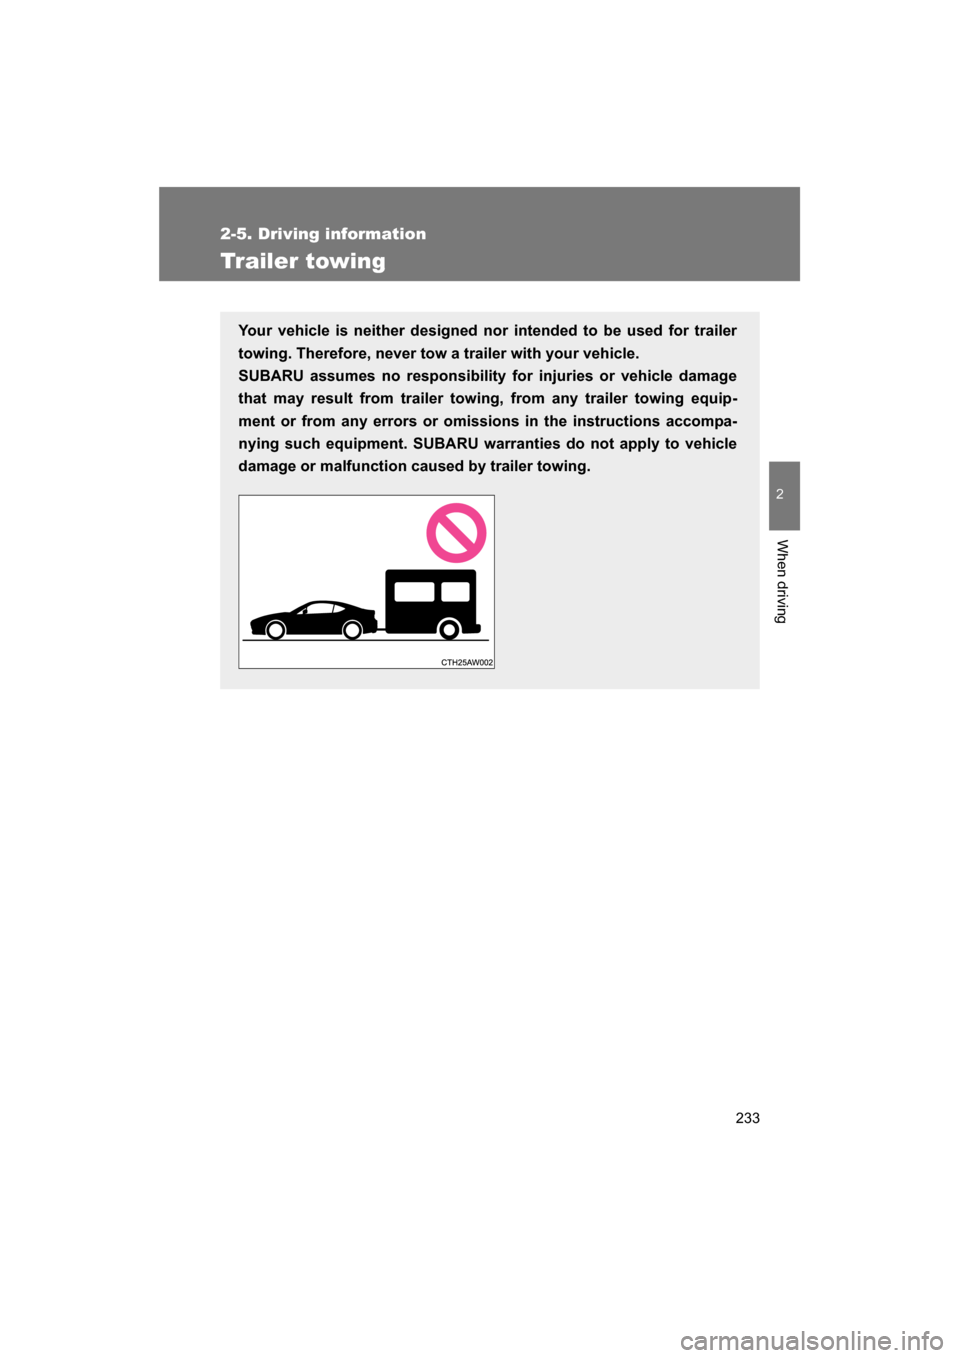 SUBARU BRZ 2014 1.G Owners Manual 233
2-5. Driving information
2
When driving
Trailer towing
Your vehicle is neither designed nor intended to be used for trailer 
towing. Therefore, never tow a trailer with your vehicle. 
SUBARU assum